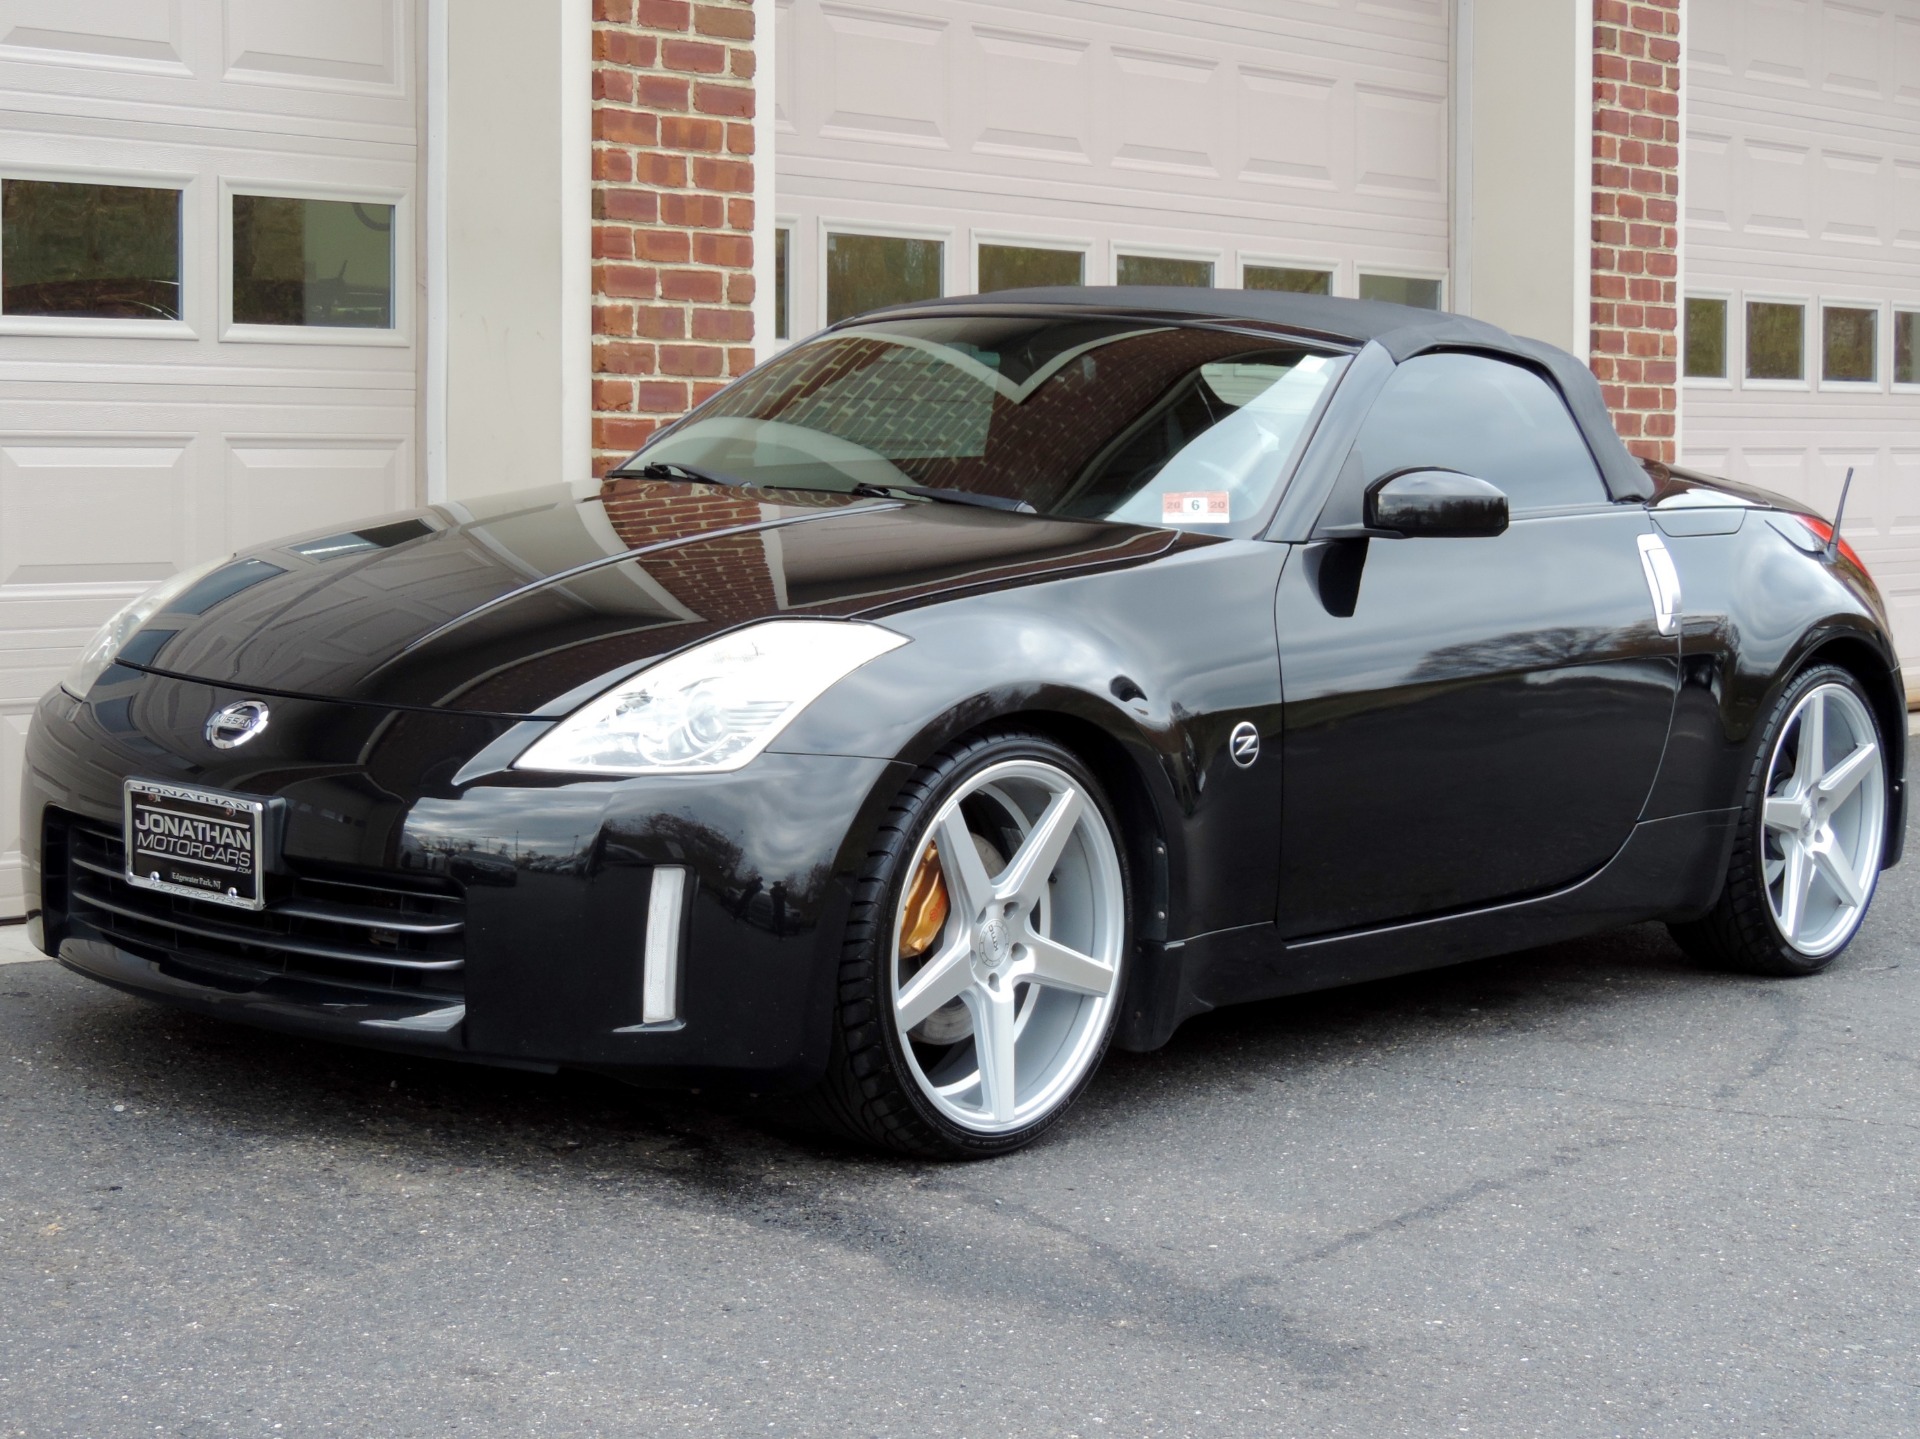 2006 Nissan 350Z Grand Touring Stock # B57623 for sale near Edgewater